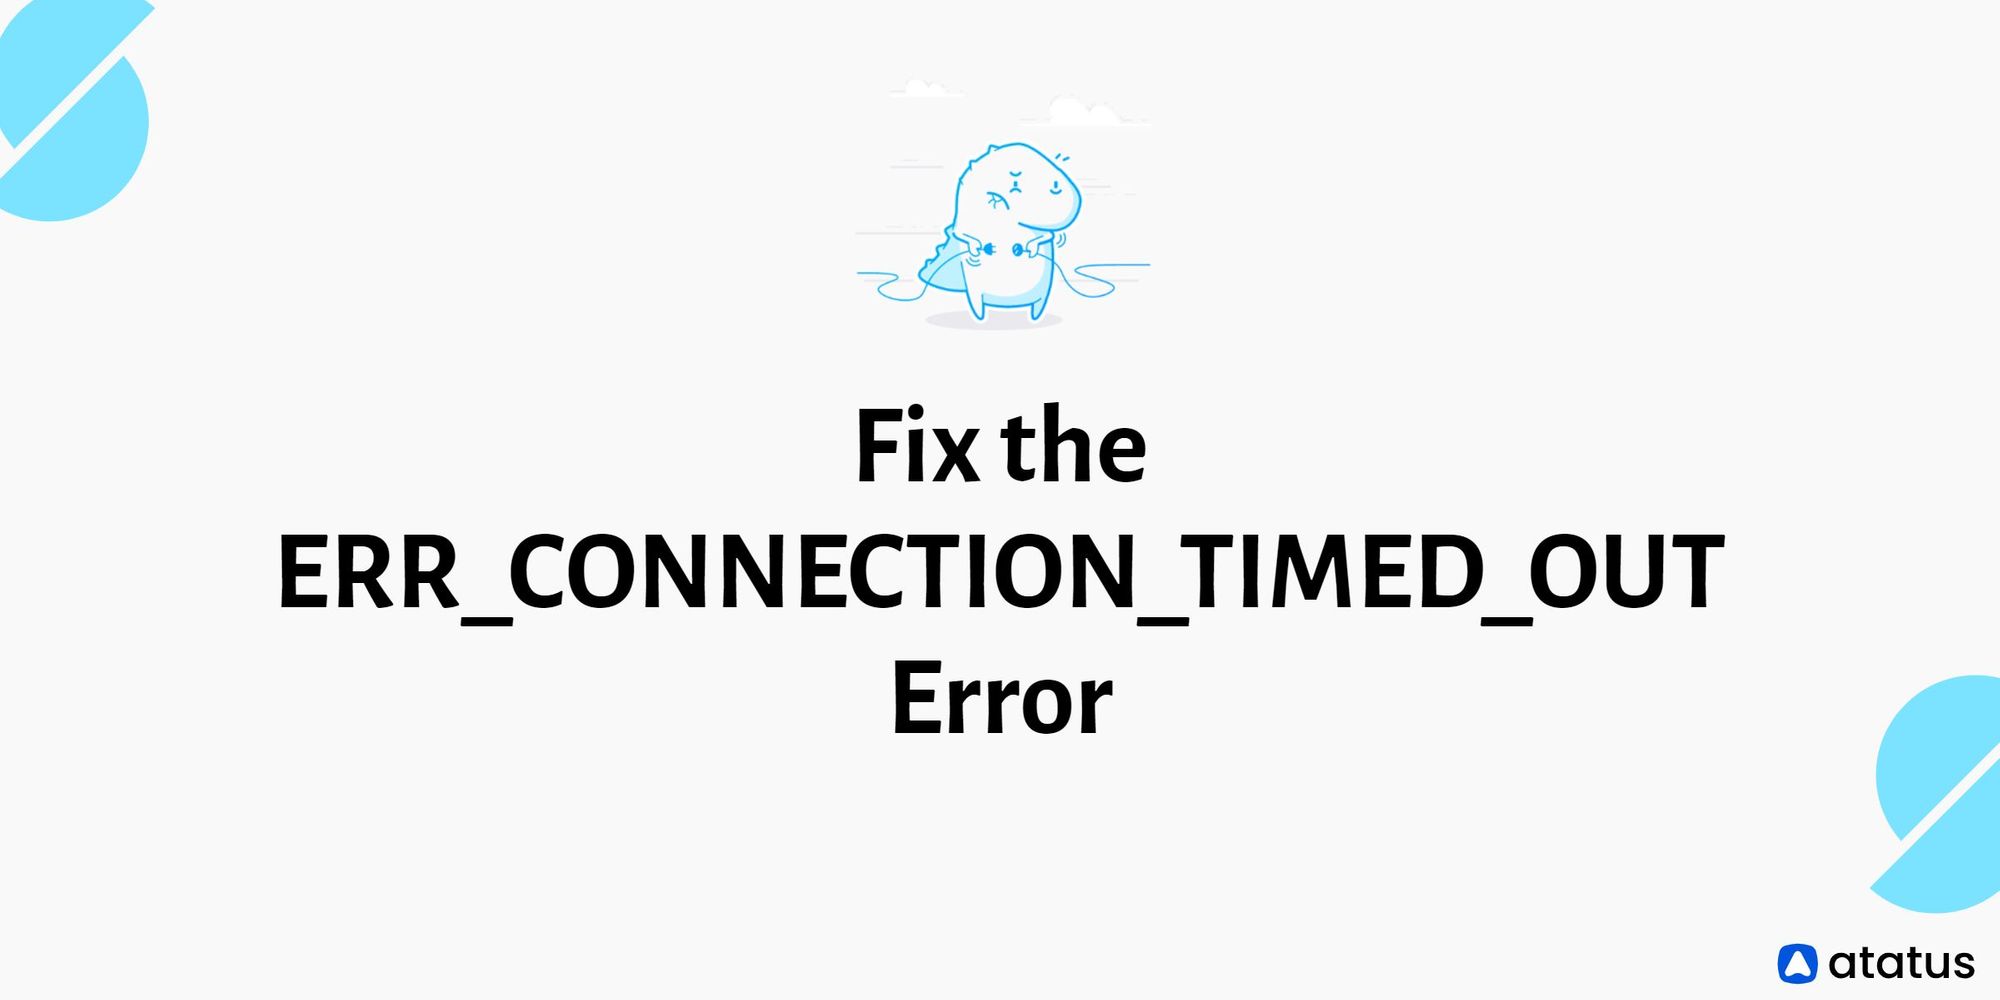 Ways To Fix The ERR CONNECTION TIMED OUT Error